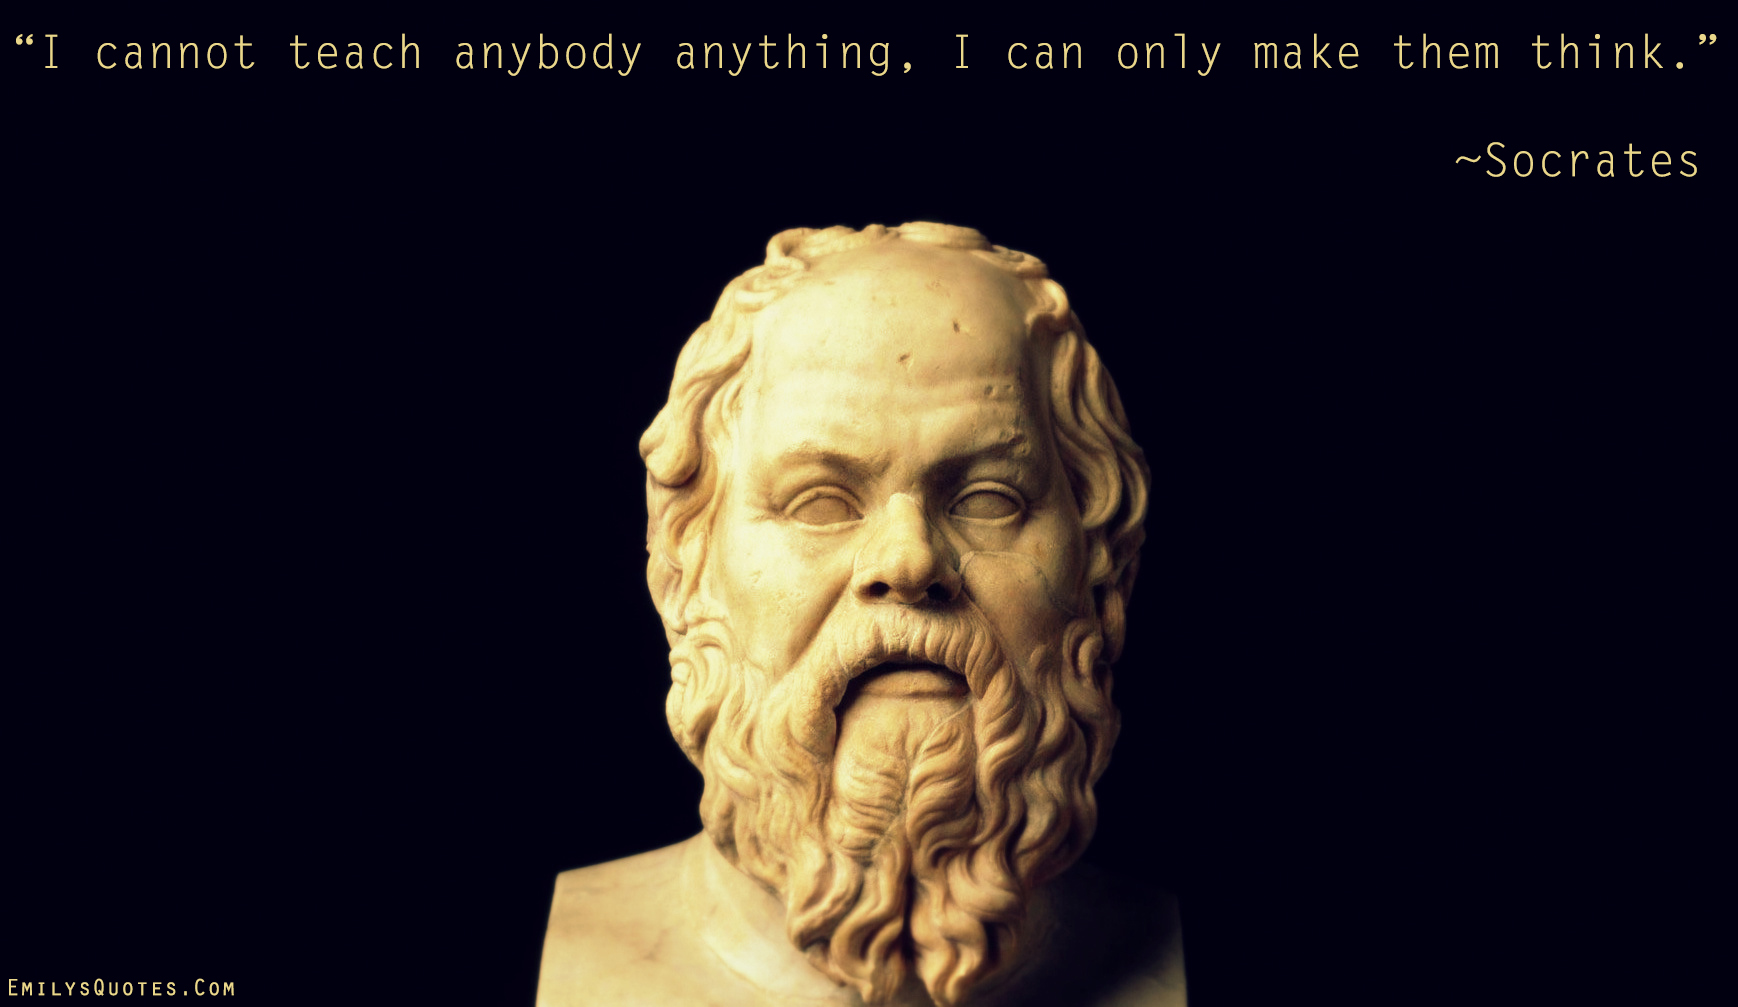 I cannot teach anybody anything; I can only make them think